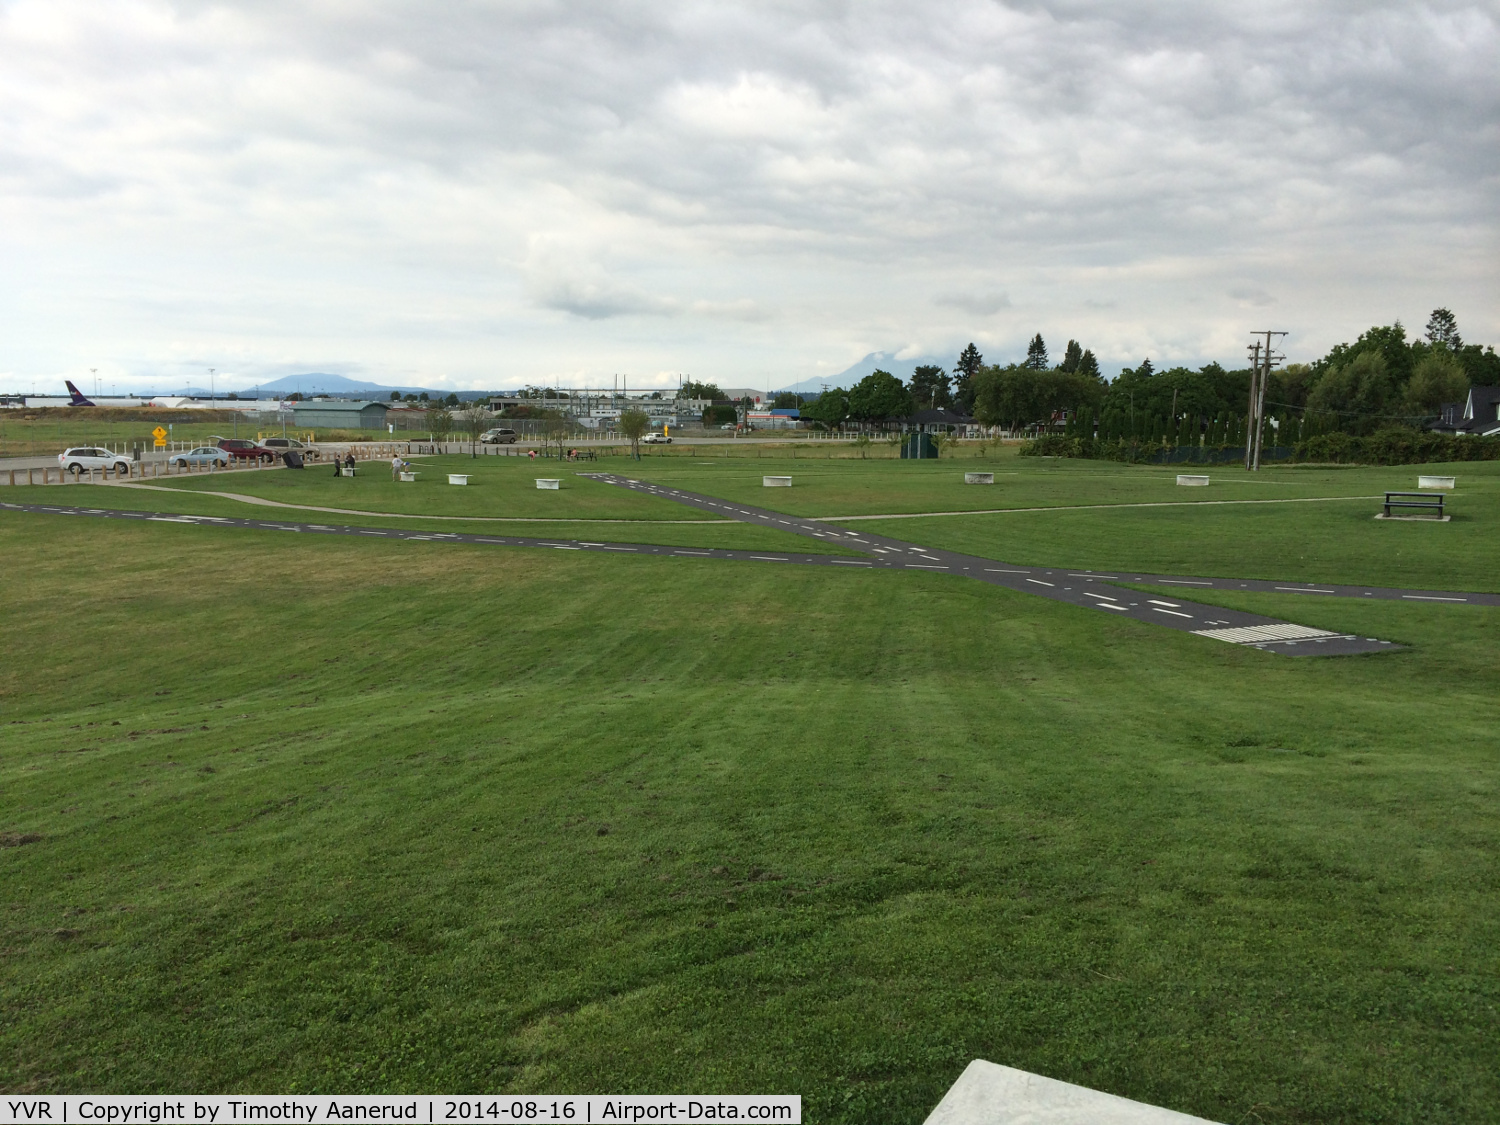 Vancouver International Airport, Vancouver, British Columbia Canada (YVR) - Runways to play on at the Larry Berg Flight Path Park